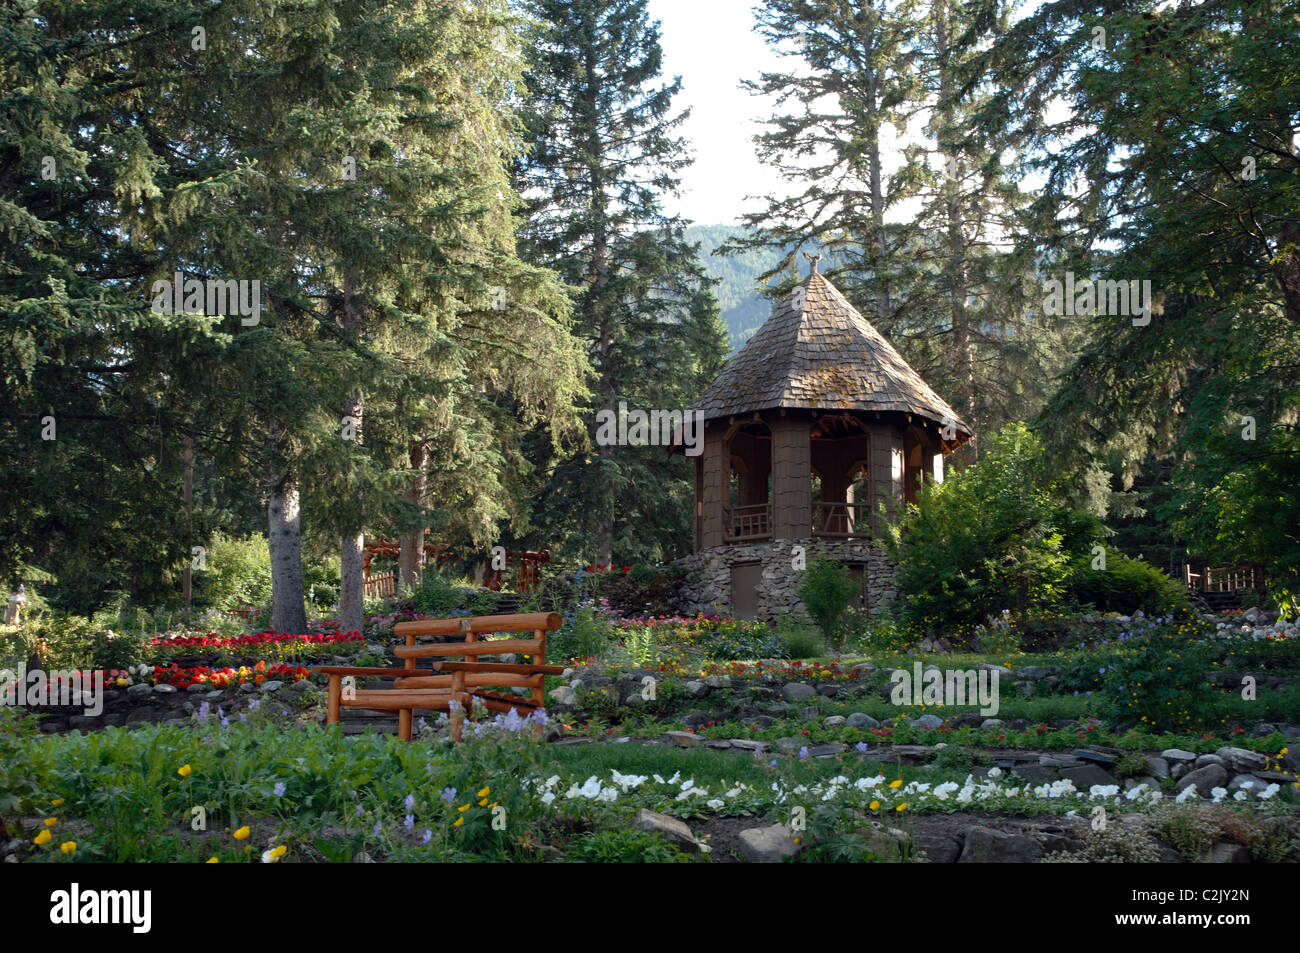 A pavilion and view of the gardens at Canada Place gardens, Banff, Alberta, Canada Stock Photo